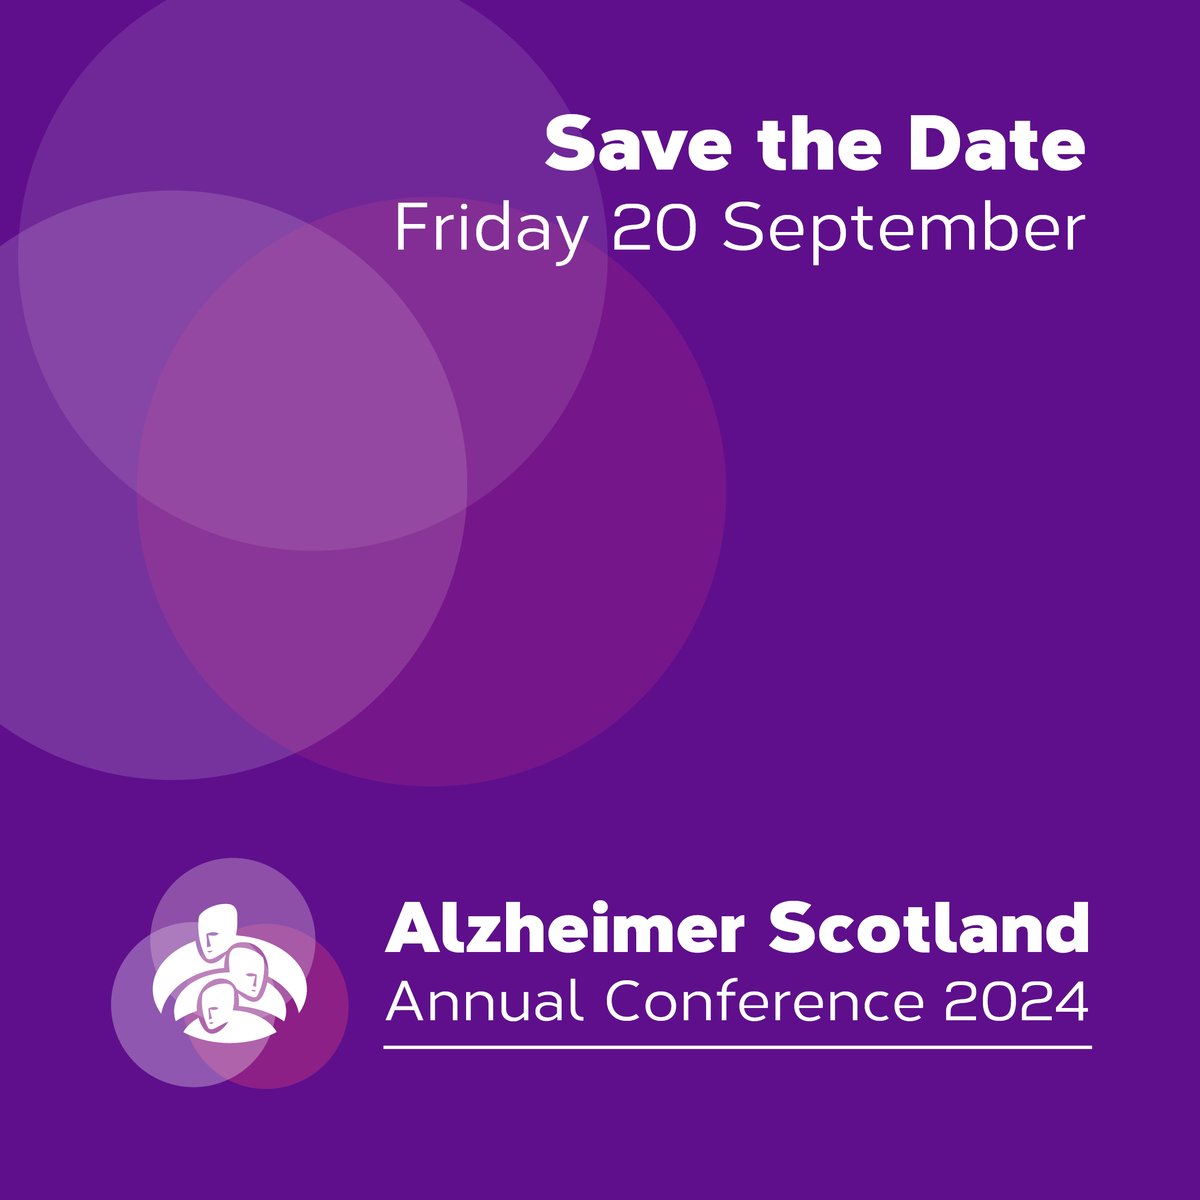 Our Annual Conference takes place on Friday 20 September at the Edinburgh International Conference Centre. Tickets and early bird rates available. Free tickets for people with dementia & their carers, email conference@alzscot.org. Book your ticket👉eventbrite.co.uk/e/alzheimer-sc…